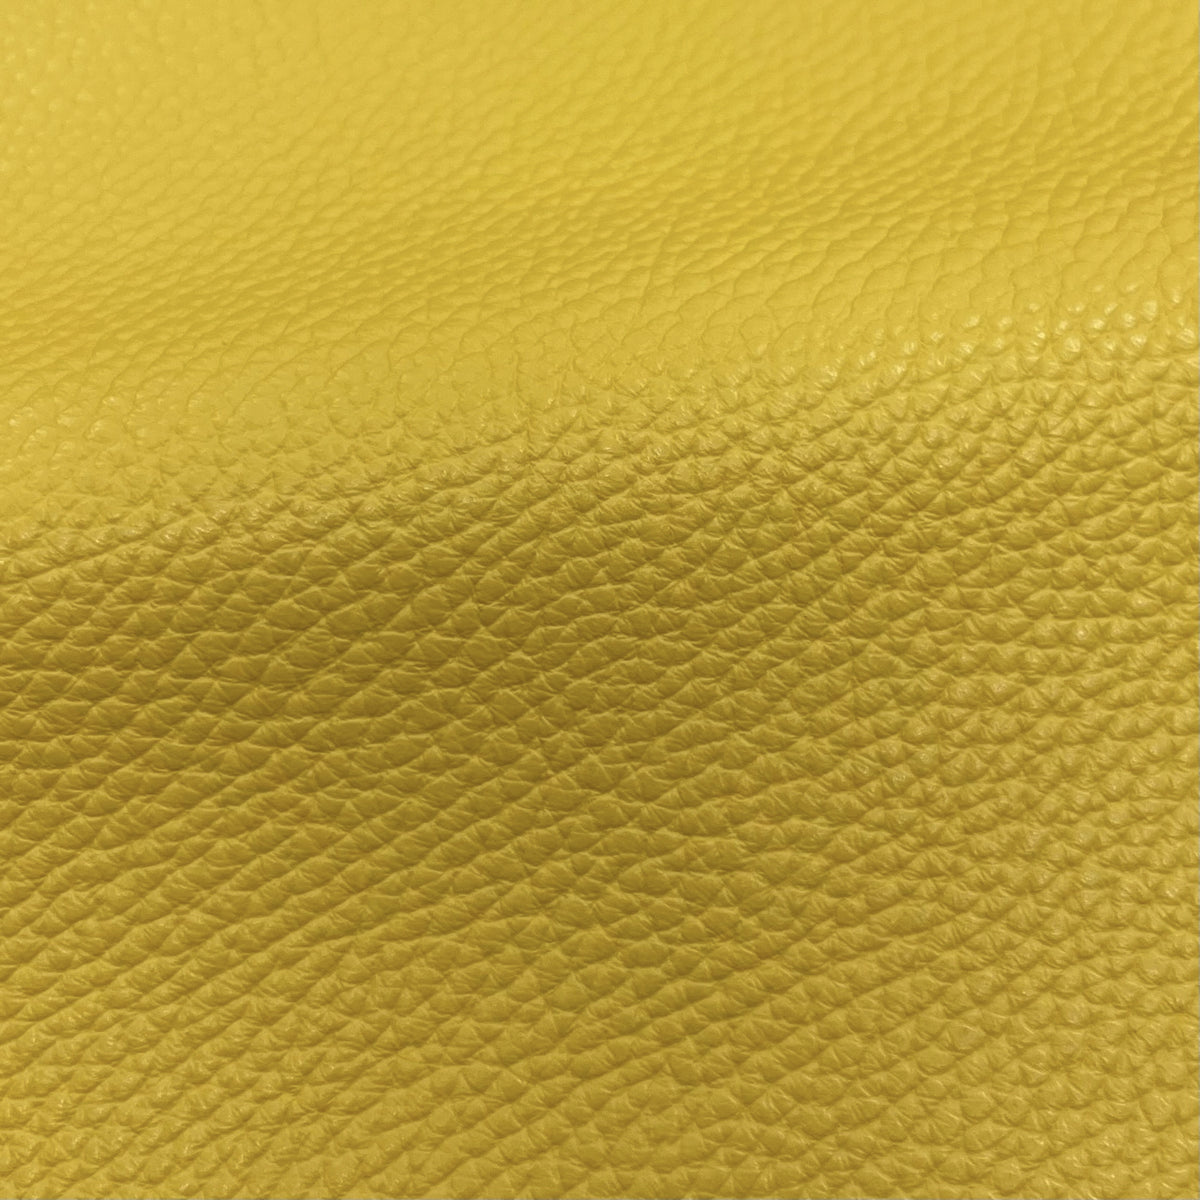 Faux Leather Fabric in Cow Leather Pattern - Mustard Yellow - Half Yard -  Vegan Leather - The Heyday Shop